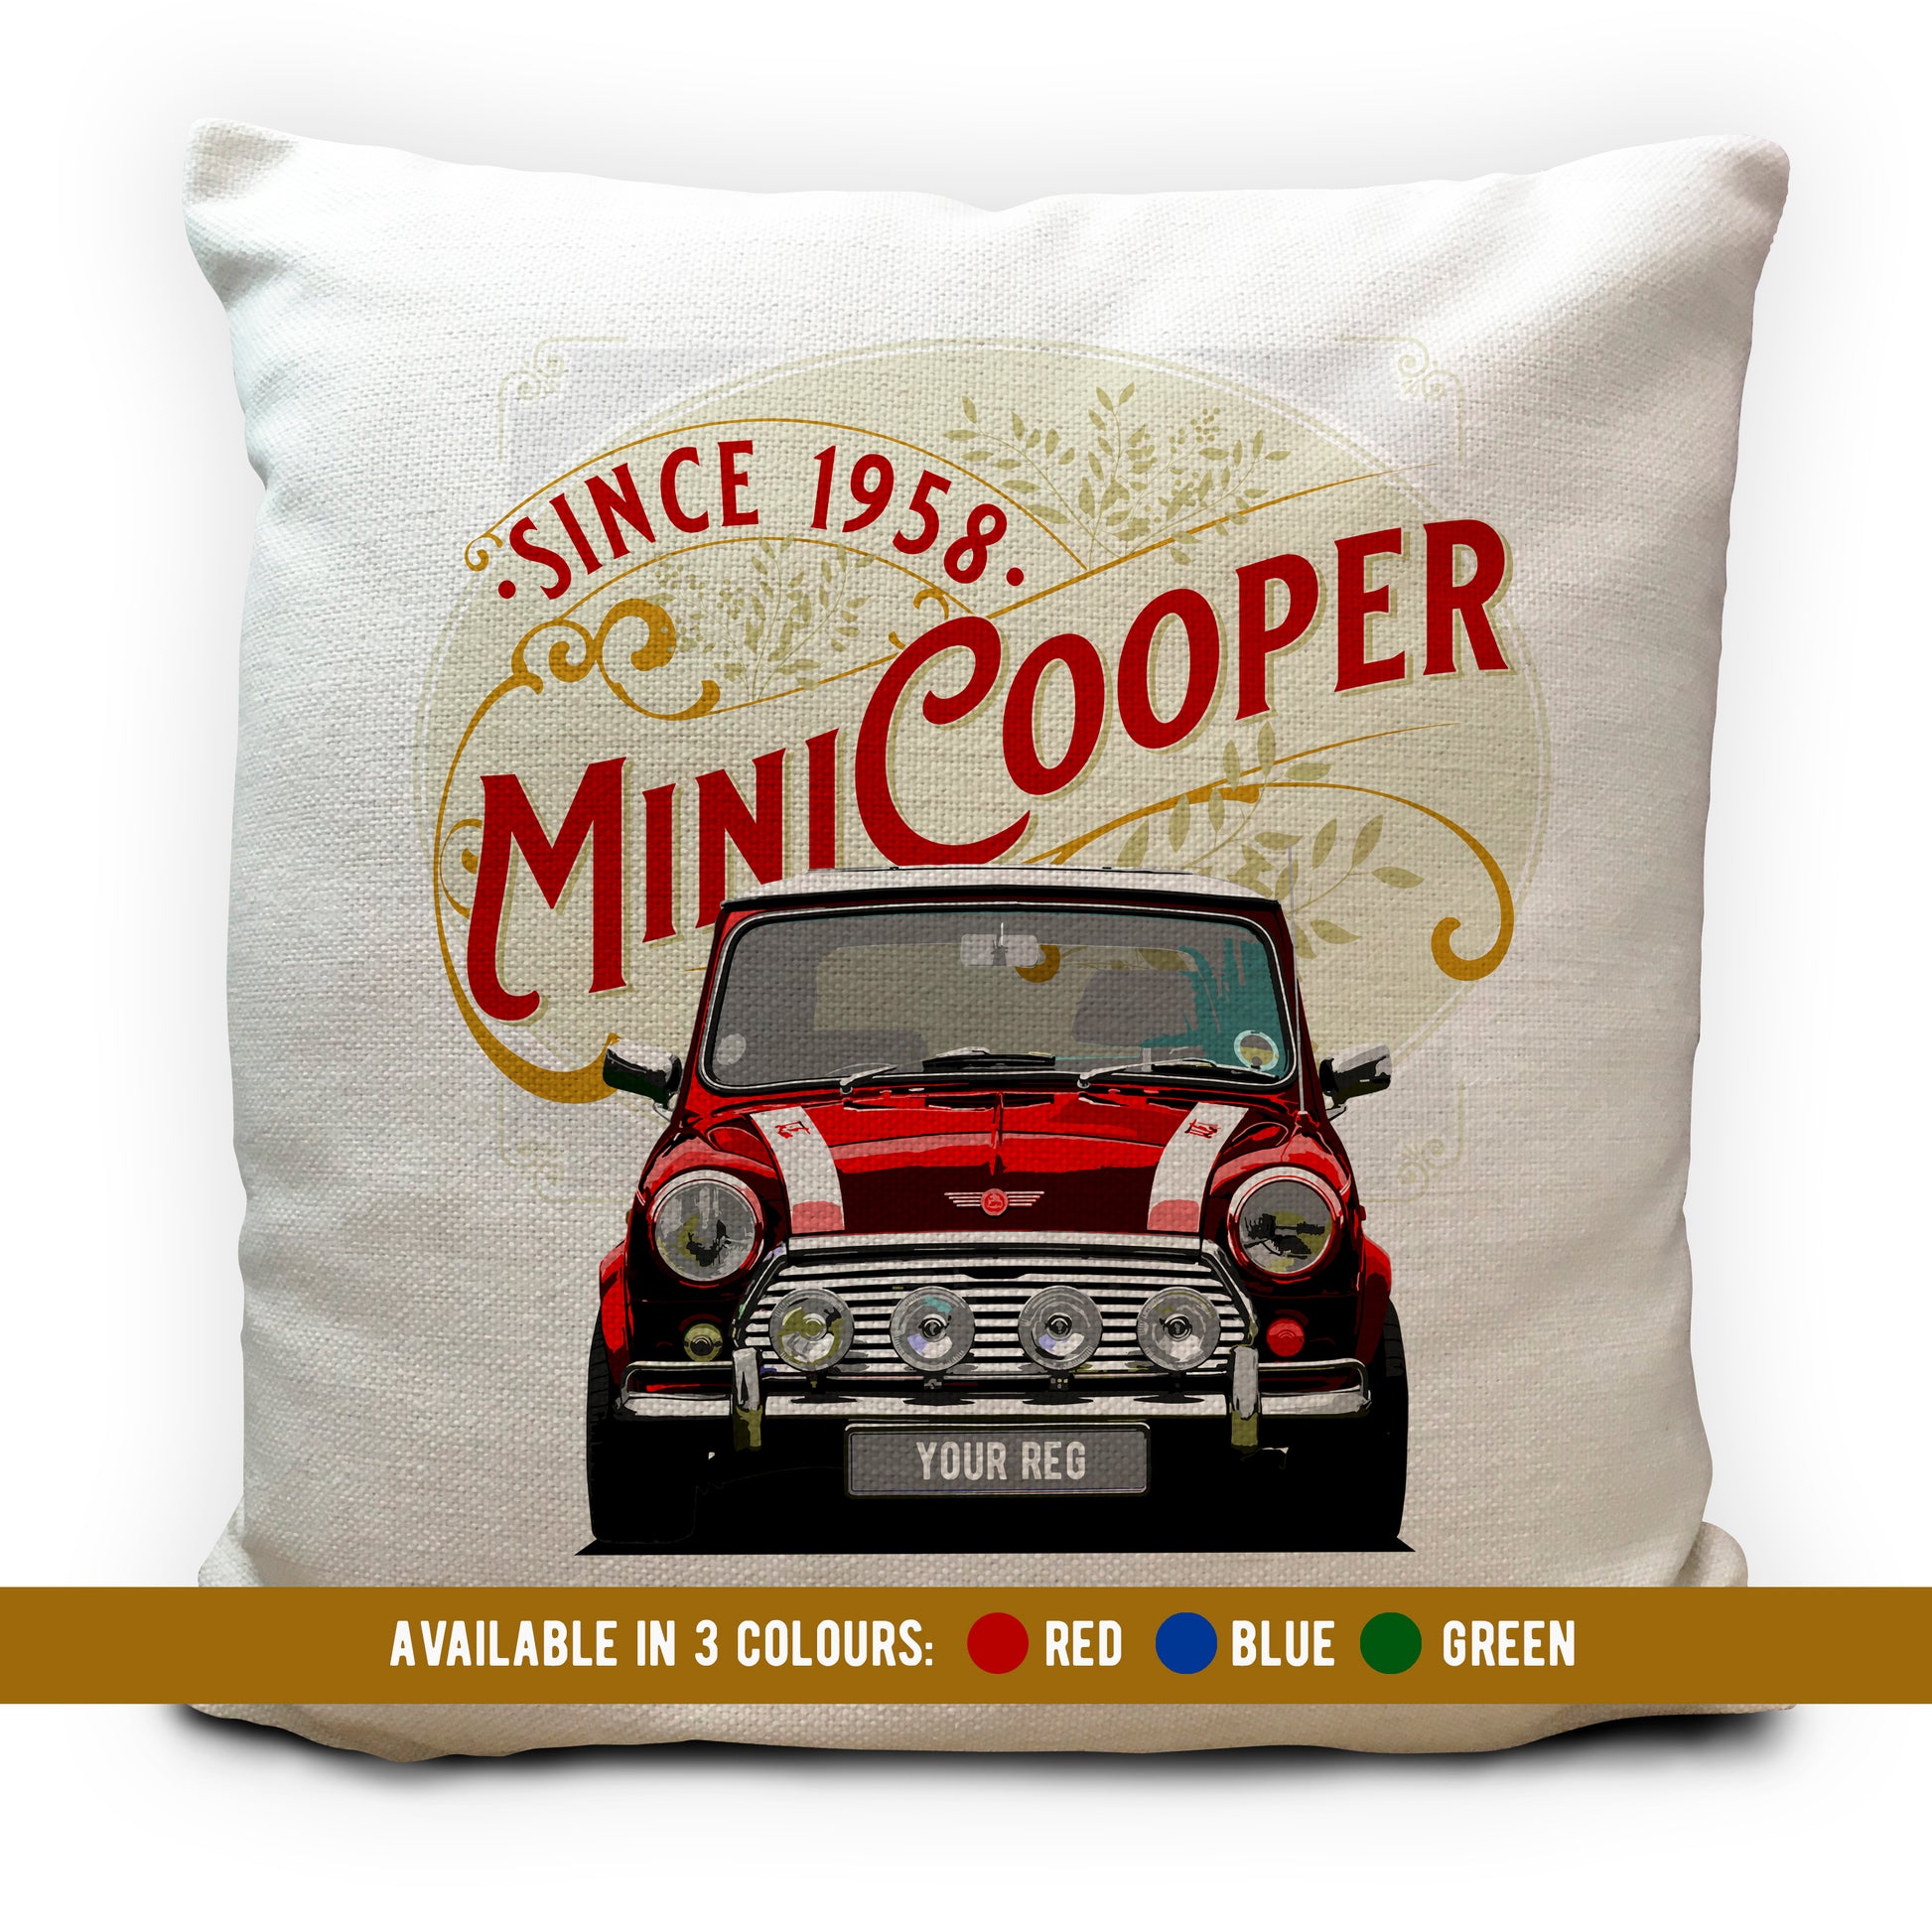 Personalised Mini Cooper 1960s Cushion with Personalised number plate shown in red colour